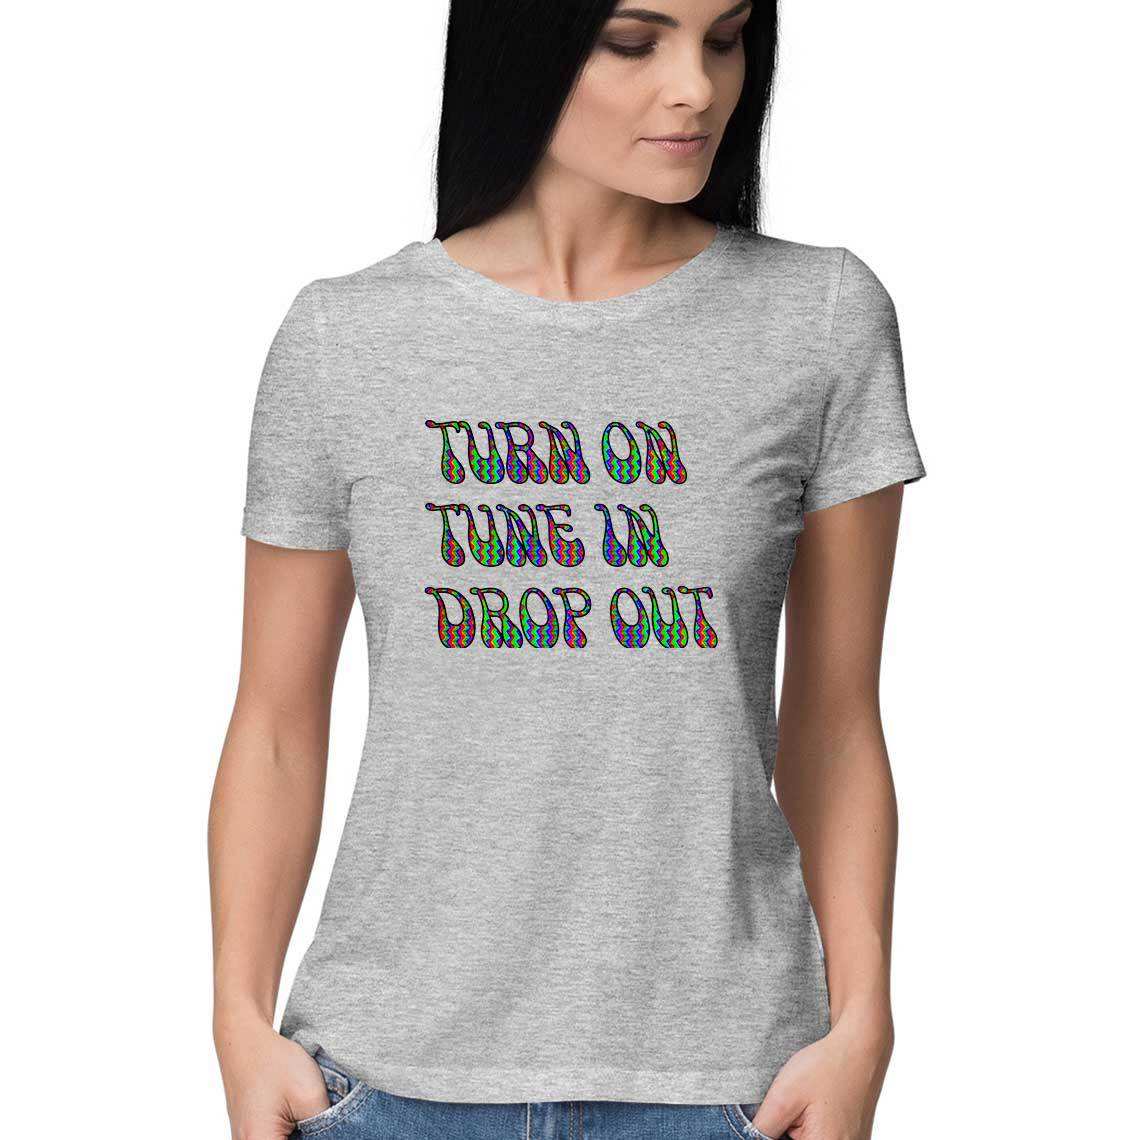 Turn on, Tune in and Drop Out Women's T-Shirt - CBD Store India